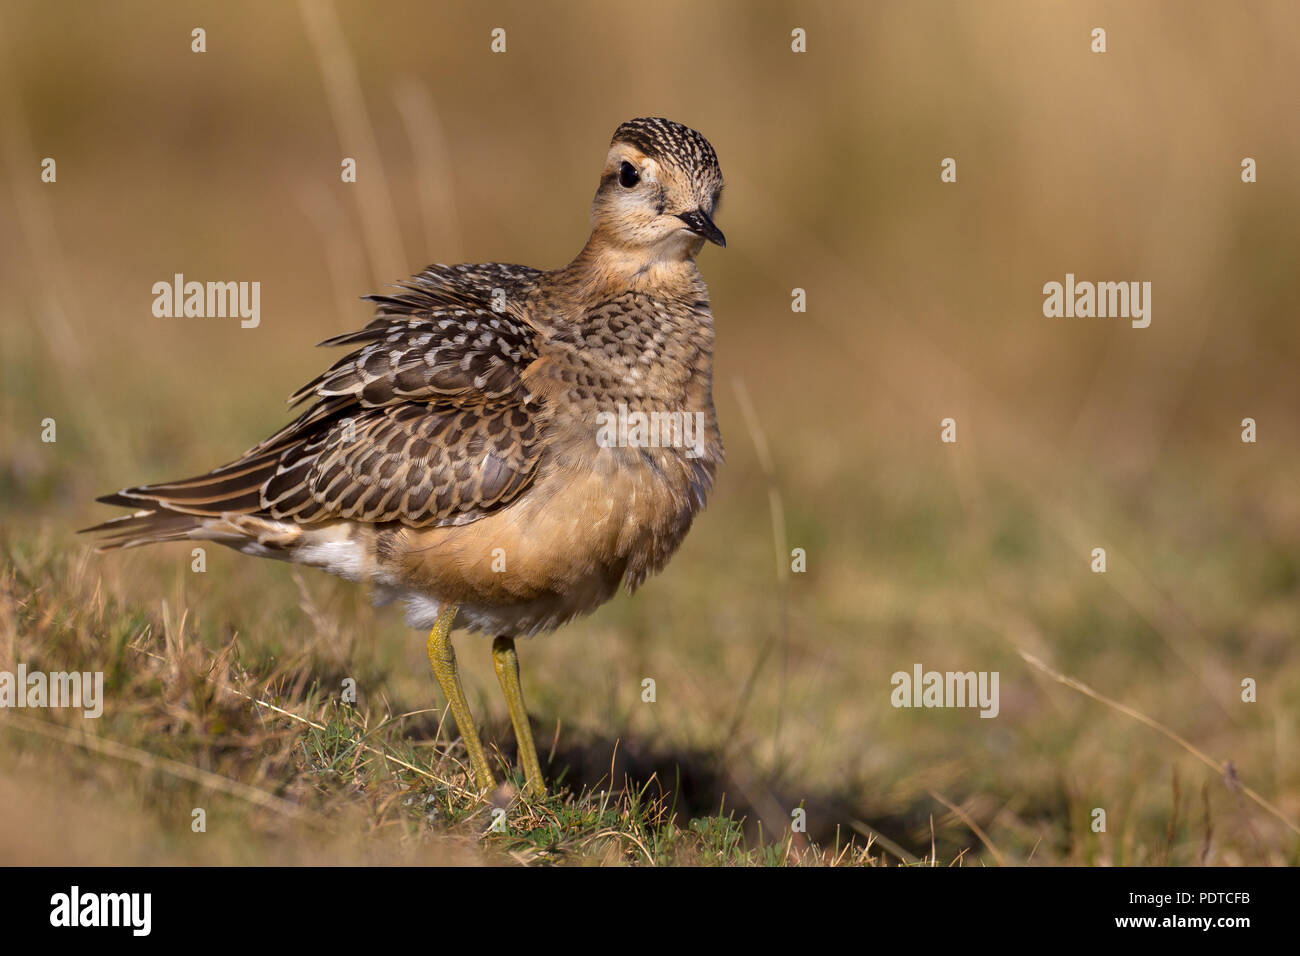 Eurasian Dotterel standing in the grass with ruffled feathers. Stock Photo